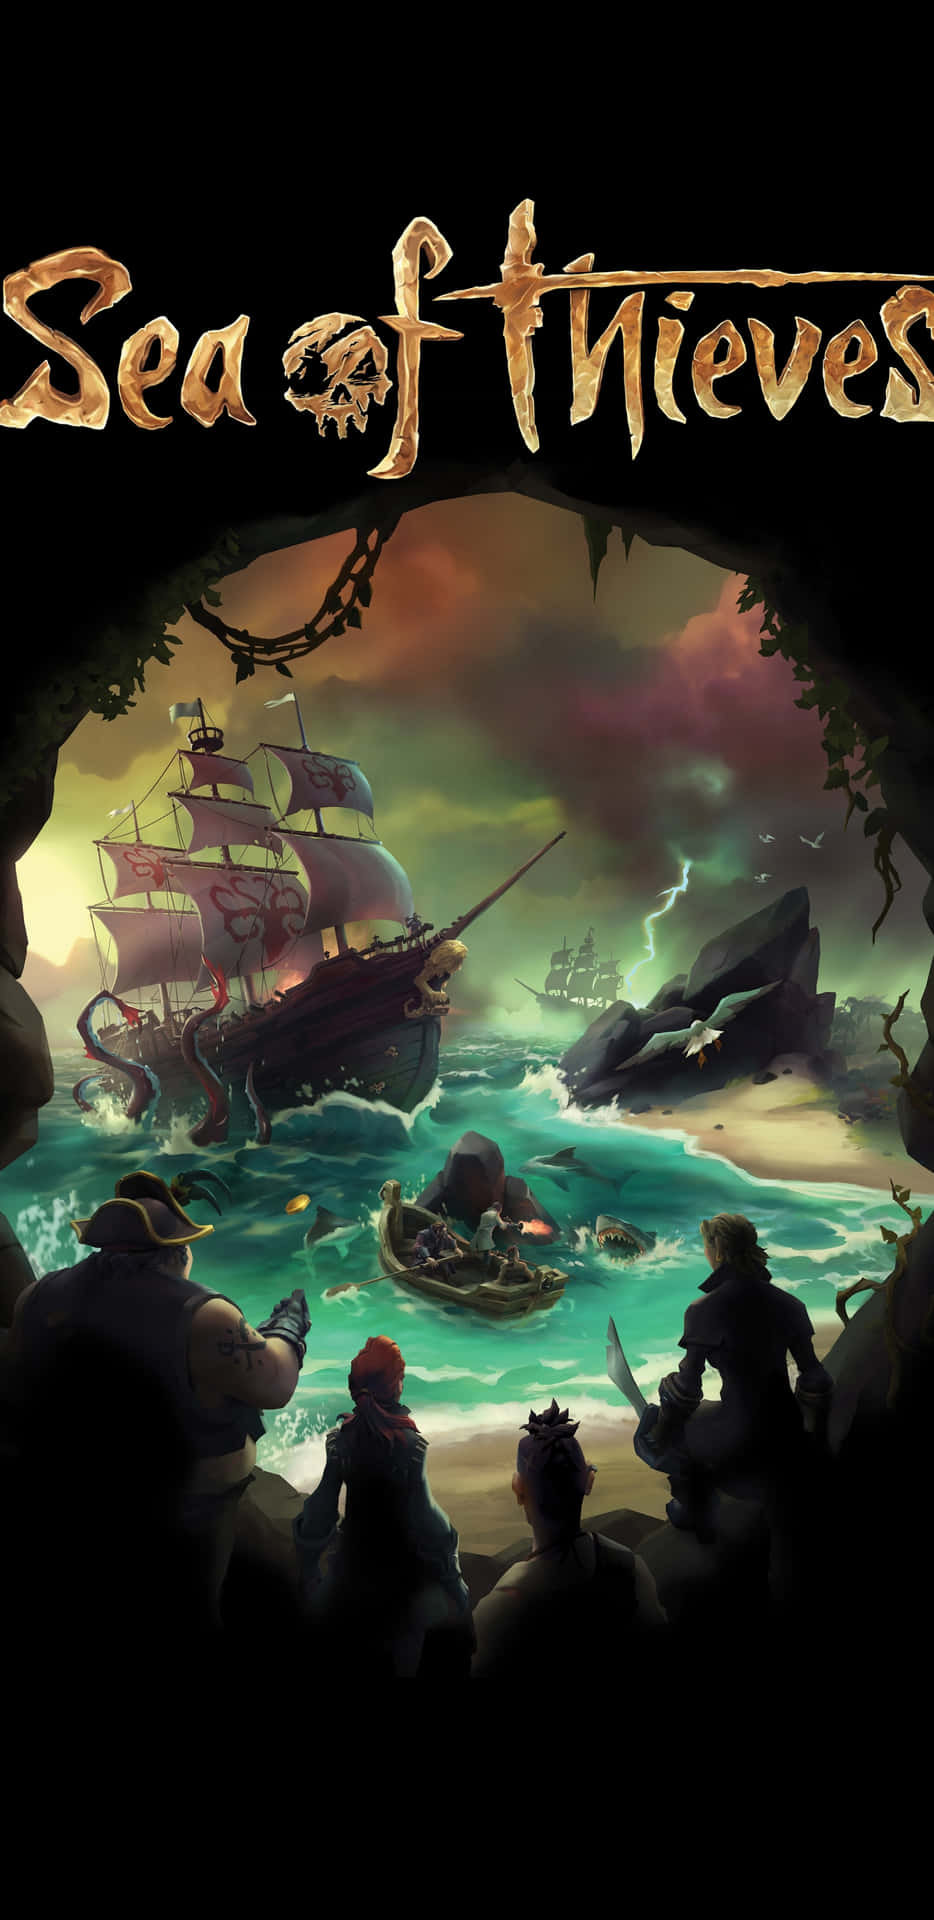 Experience the ultimate pirate adventure with Sea of Thieves Wallpaper